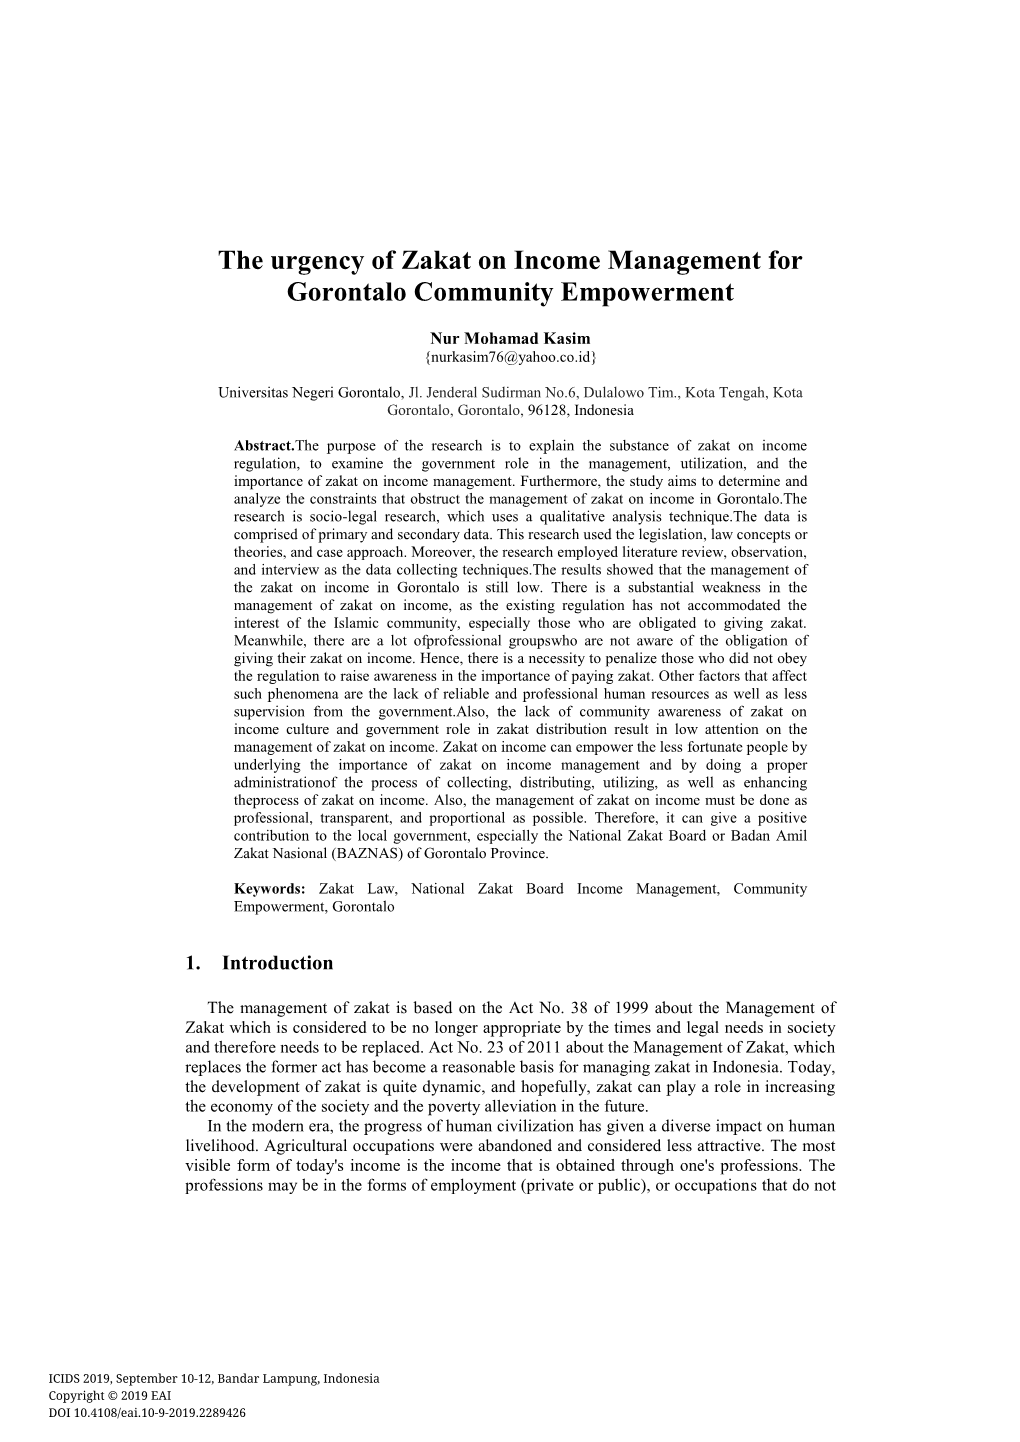 The Urgency of Zakat on Income Management for Gorontalo Community Empowerment